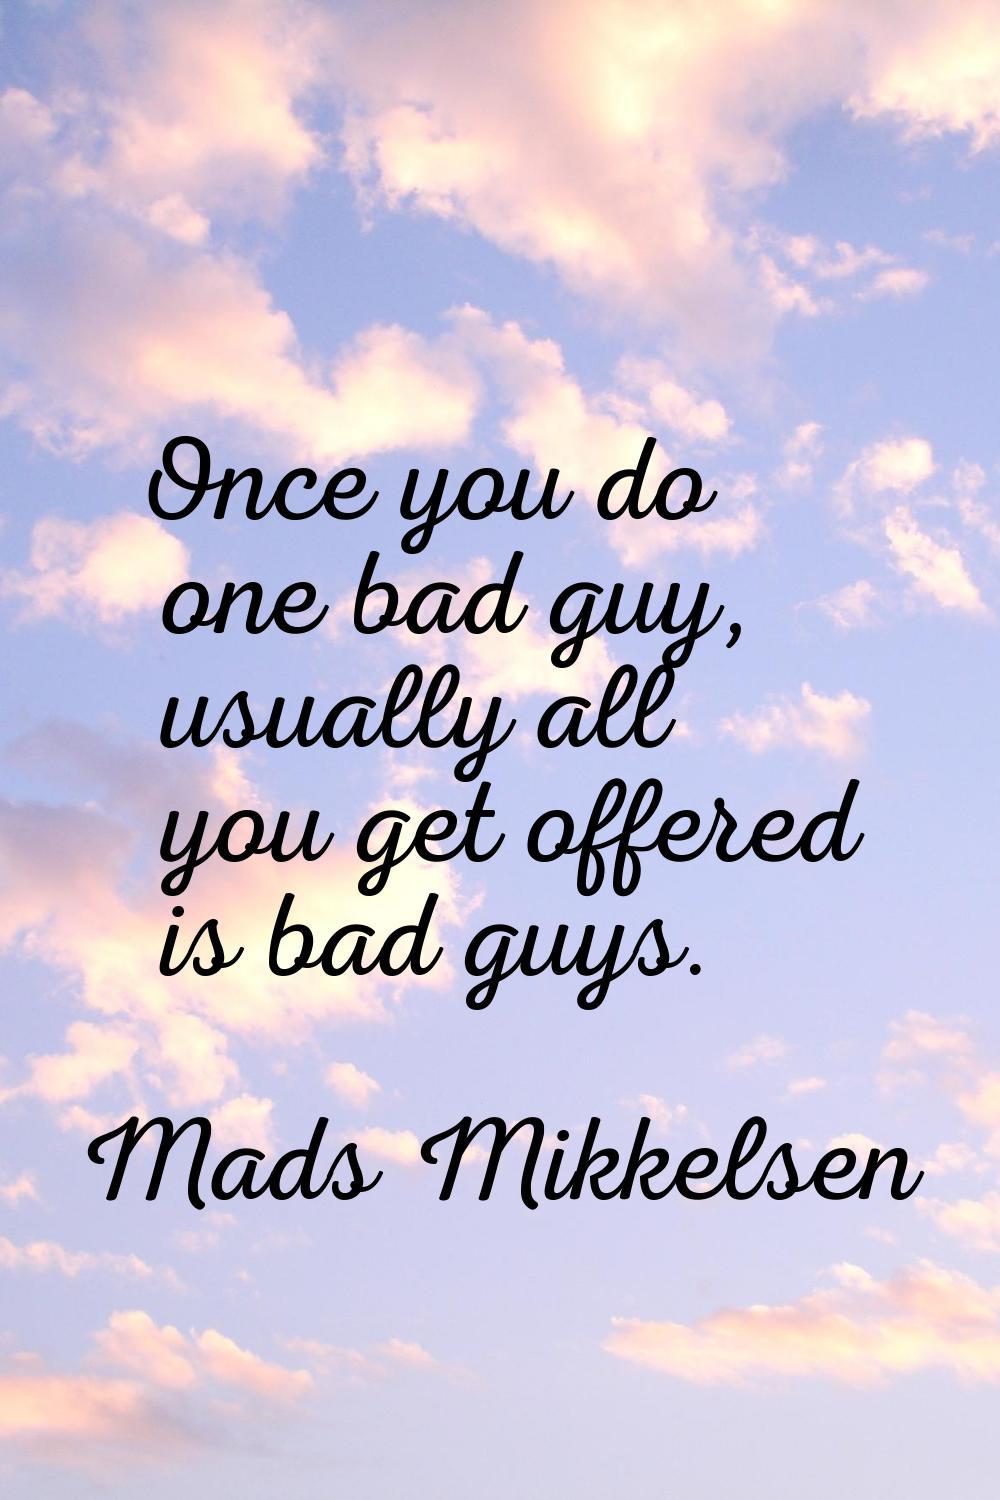 Once you do one bad guy, usually all you get offered is bad guys.